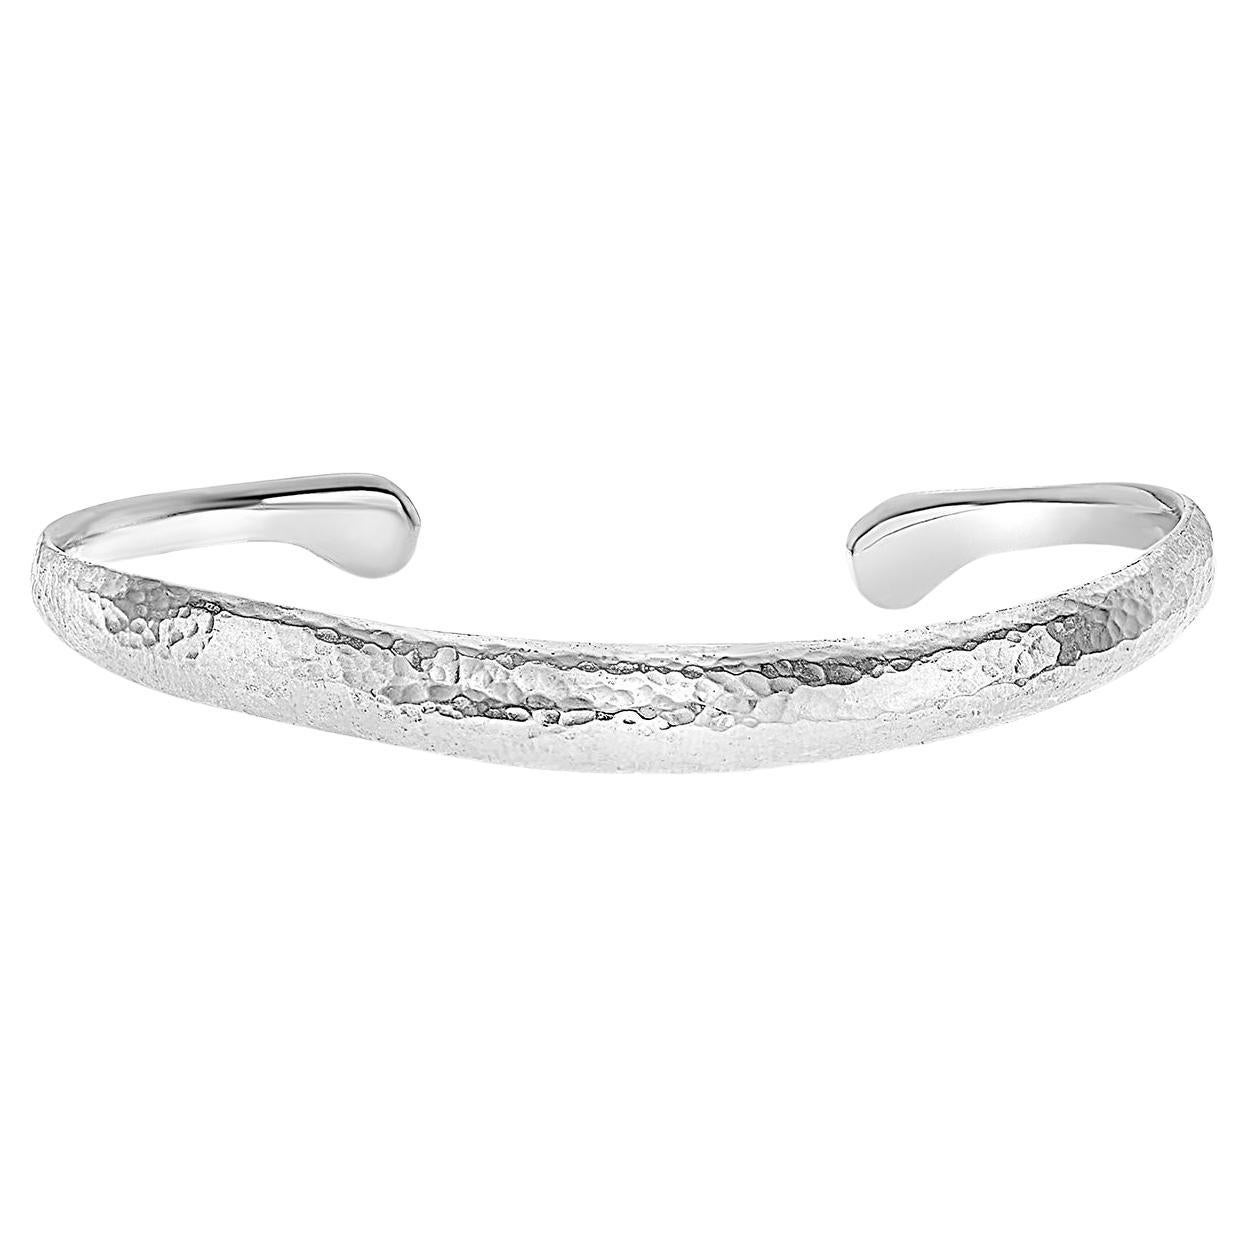 Curved Nomad Cuff Bangle In Sterling Silver